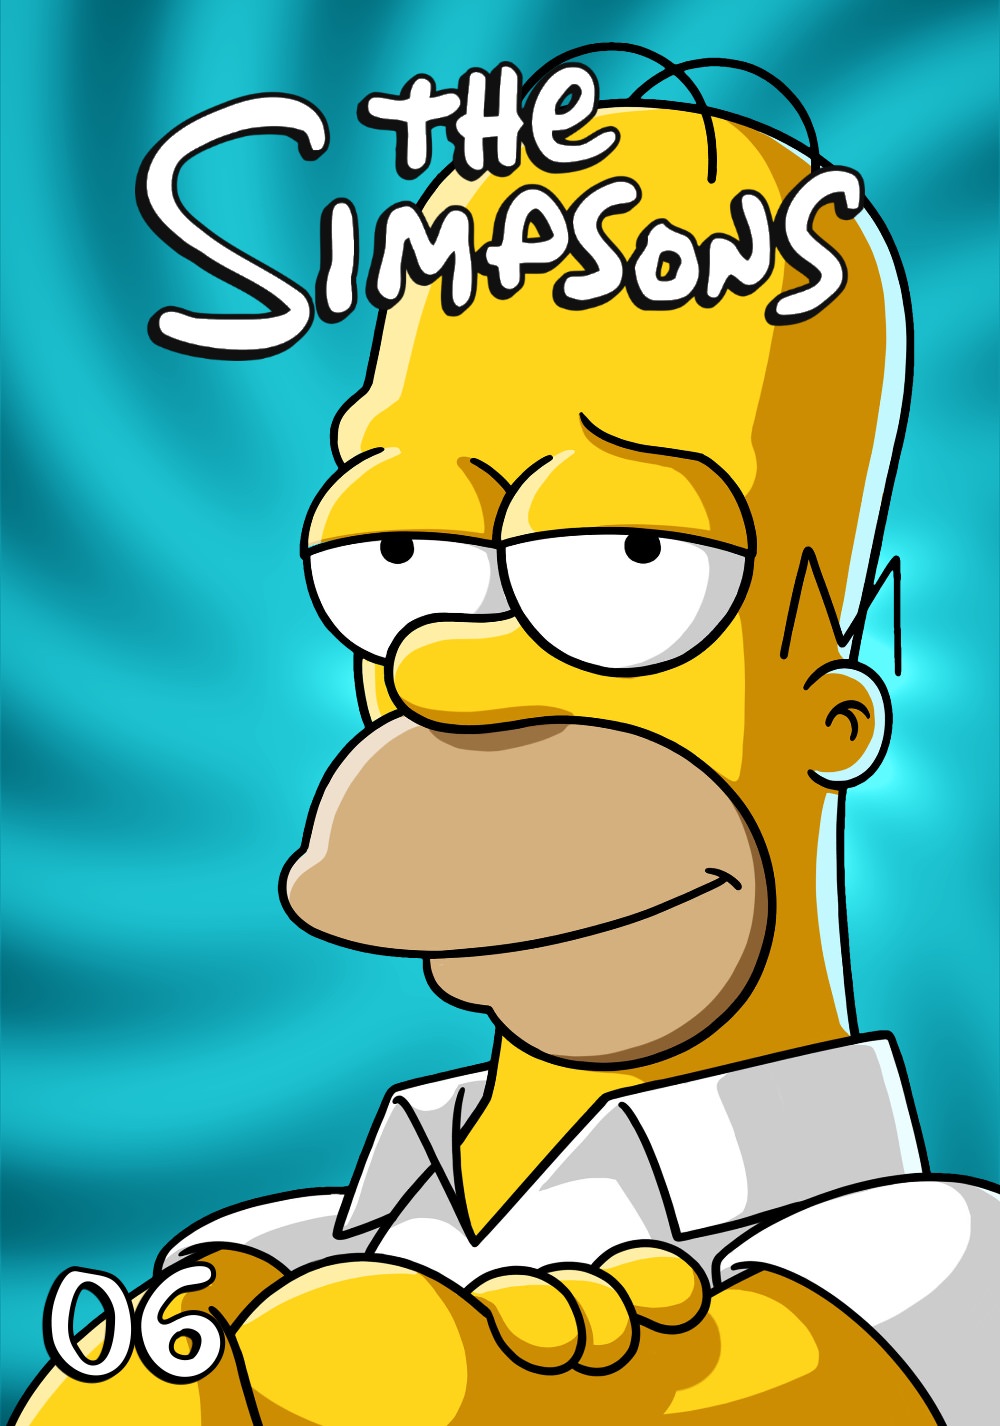 The Simpsons *Ultimate Collection* S06 (1994) BDRip 720p HEVC 10-bit EAC3-5.1 MultiSub Retail (help: niet in 1080p)